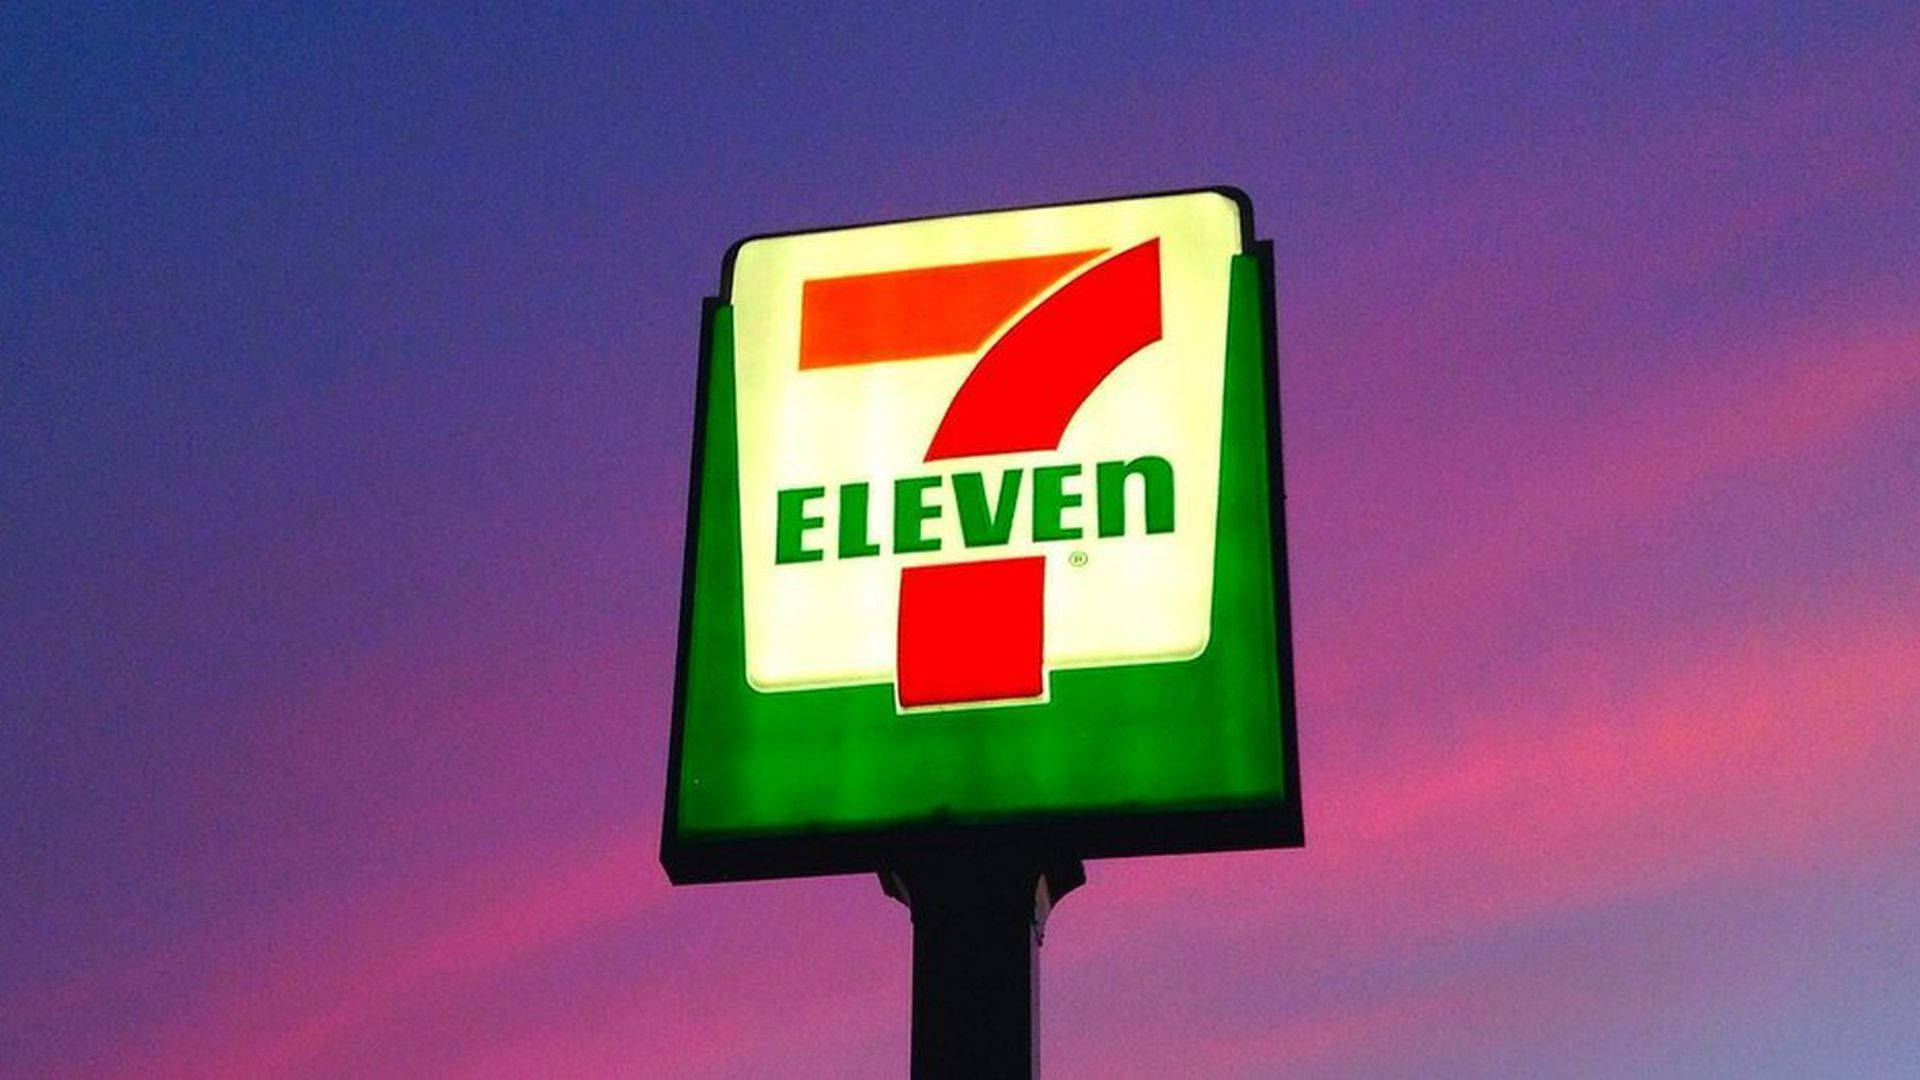 7 Eleven Wallpapers